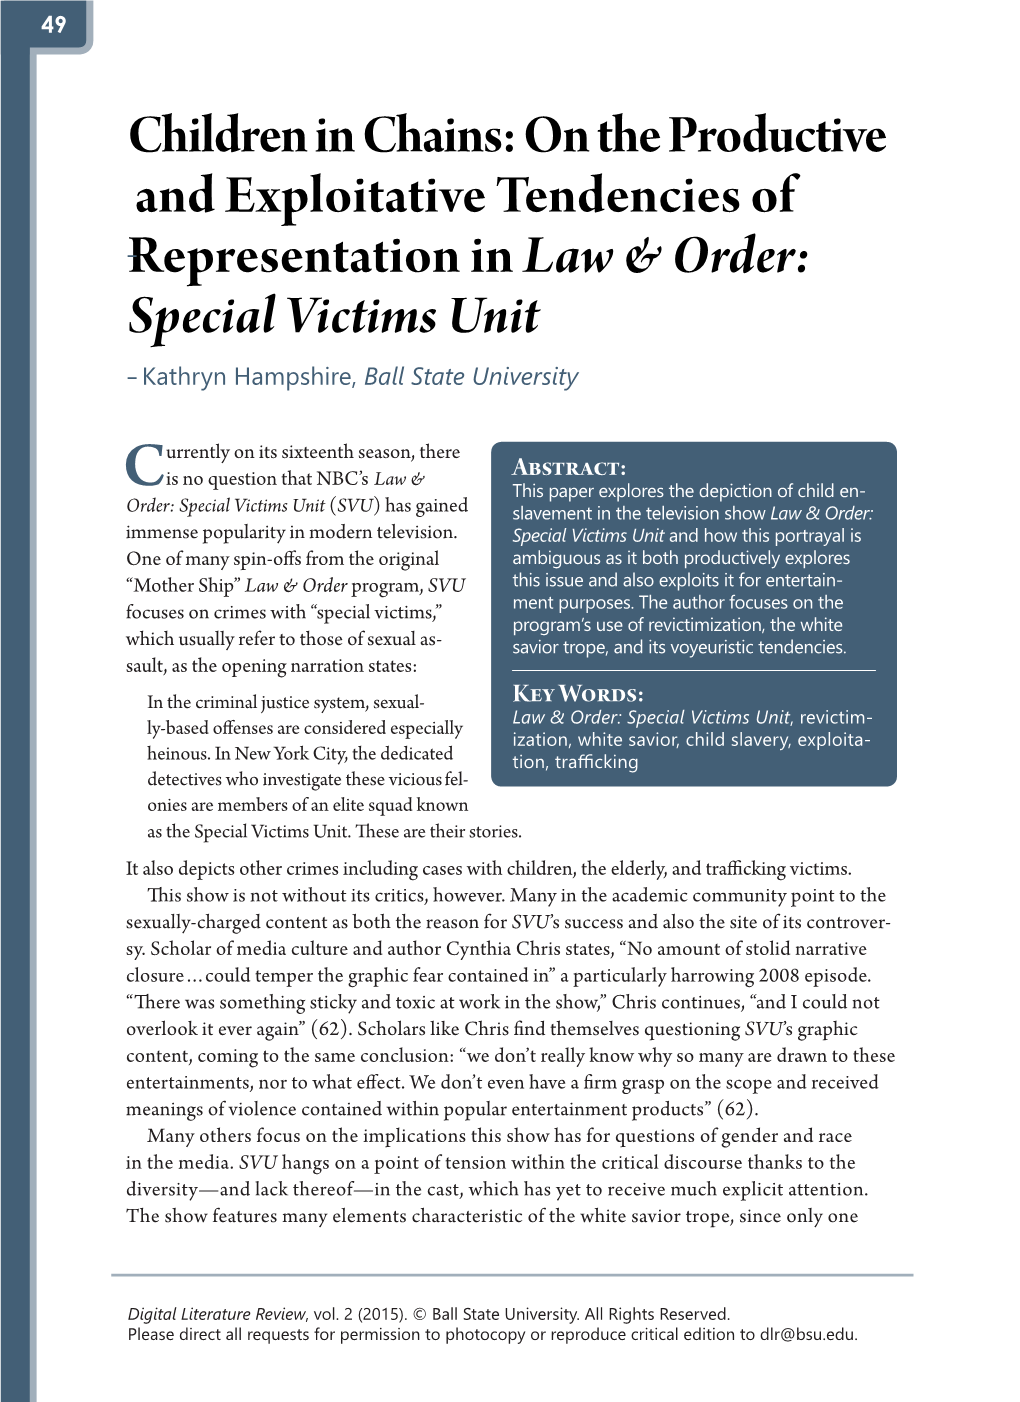 Children in Chains: on the Productive and Exploitative Tendencies of Representation in Law & Order: Special Victims Unit Kathryn Hampshire, Ball State University